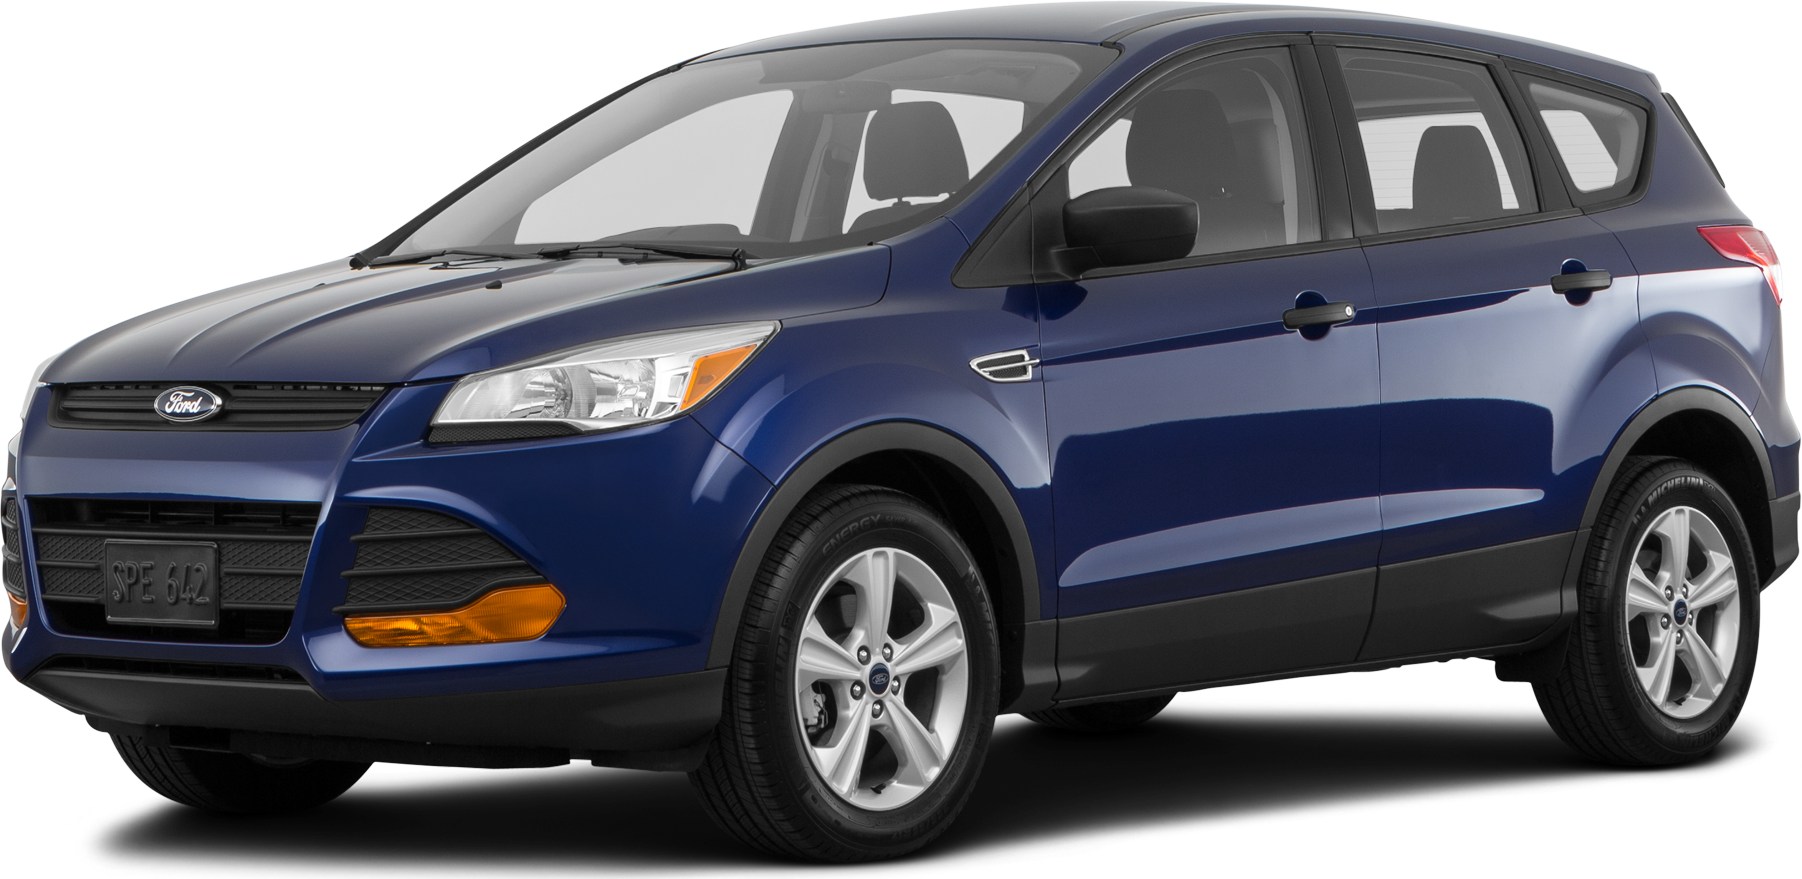 2016 Ford Escape Price, Value, Ratings & Reviews